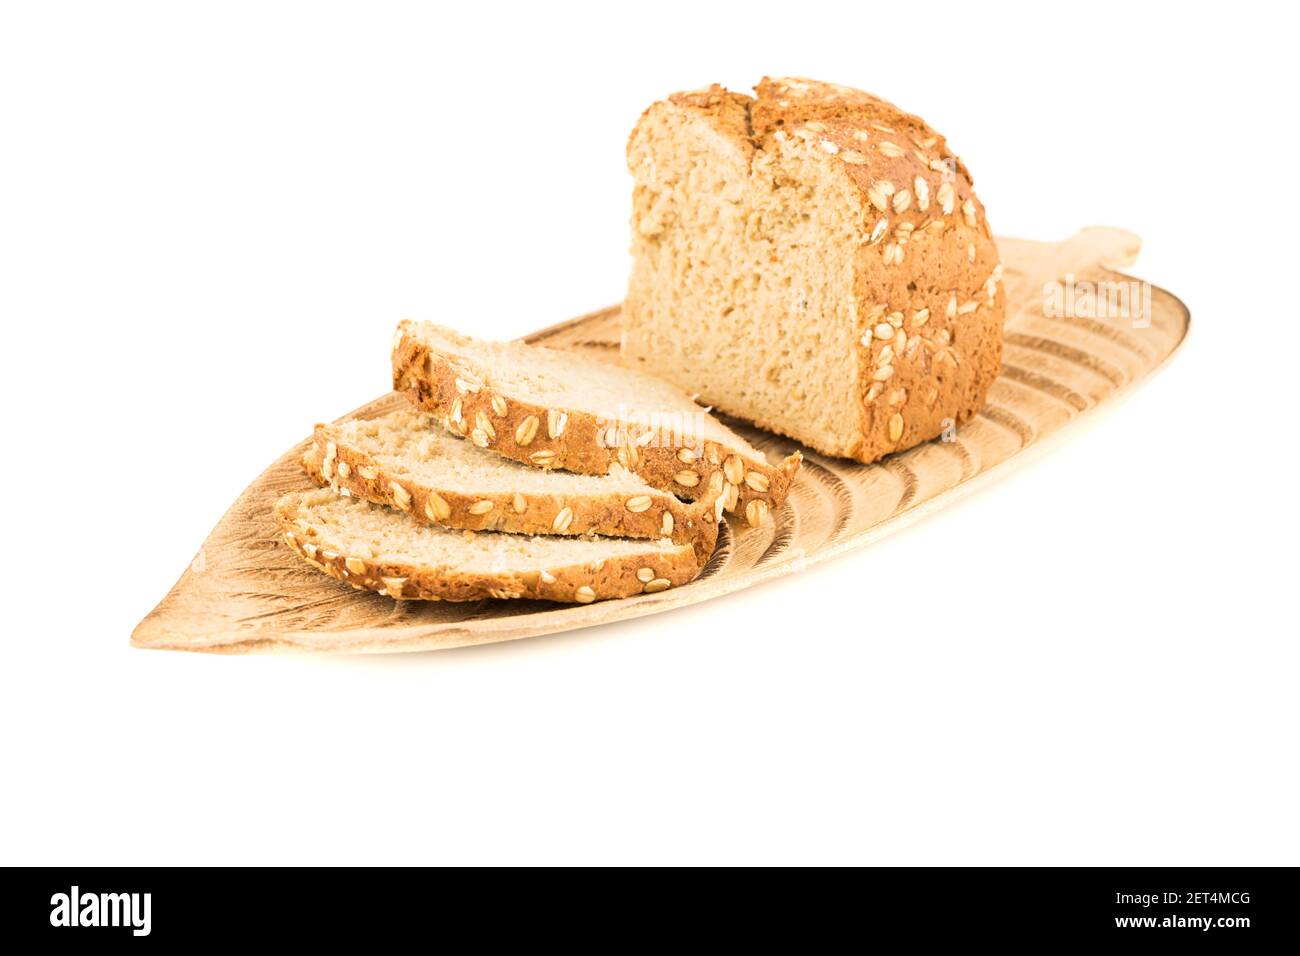 Whole grain bread bun with oat on wooden tray isolated on white background. Stock Photo